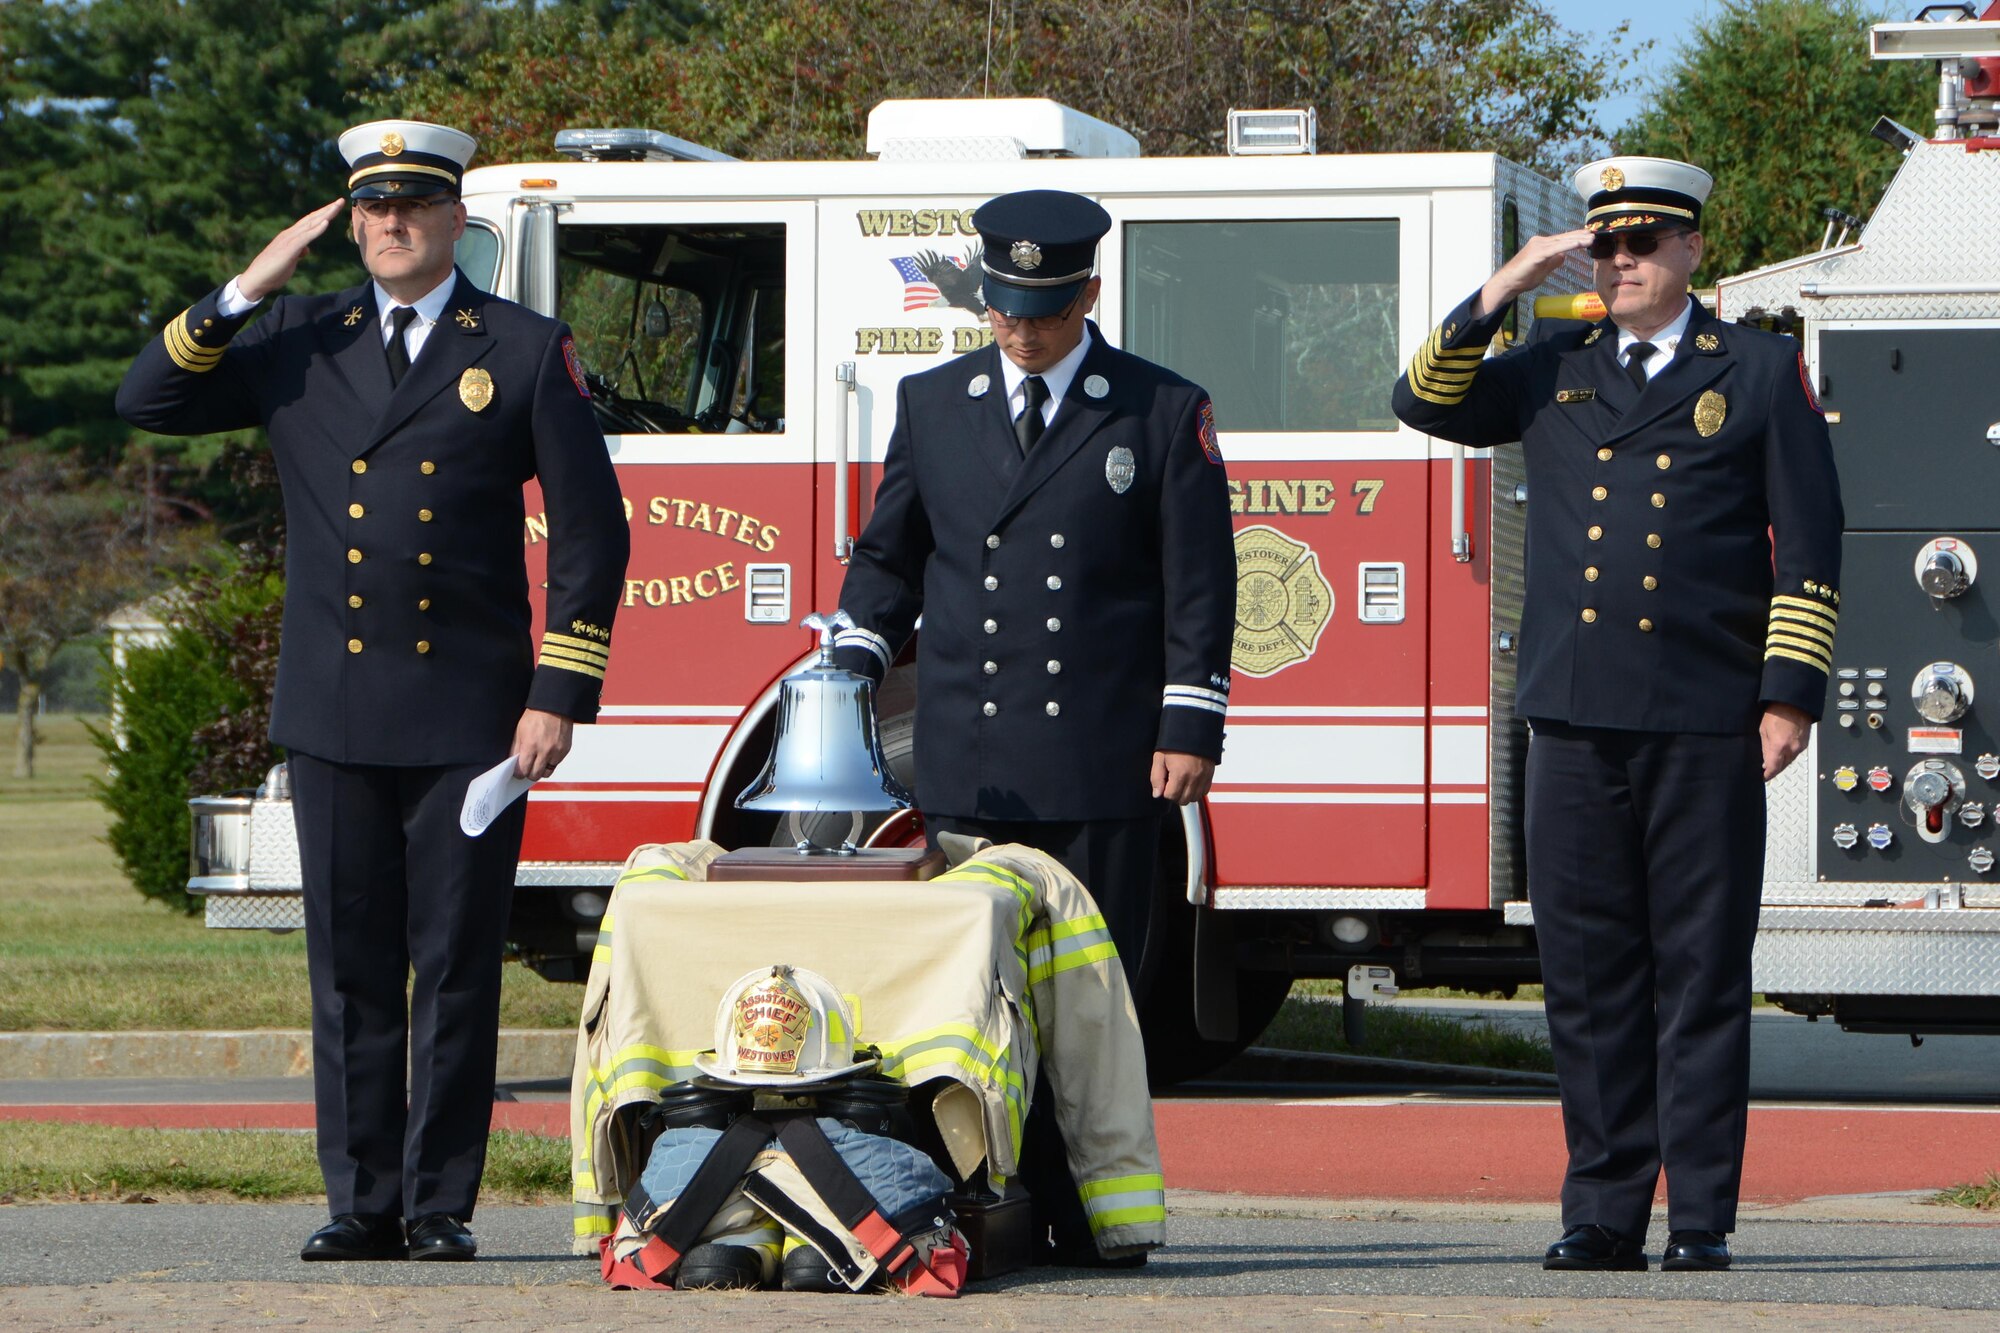 Firemen and Airmen of Westover Air Reserve Base, Mass. remember lives lost on September 11, 2001, in a ceremony September 11, 2017, on the ellipse. 16 years ago today, four passenger airliners were hijacked by Al-Qaeda terrorists. Two of these aircraft, American Airlines Flight 11, and United Airlines Flight 175, were crashed into the North and South towers, respectively, of the World Trade Center complex in New York City. A third aircraft, American Airlines Flight 77, was crashed into the Pentagon in Arlington County, Virginia. And a fourth plane, United Airlines Flight 93, which was initially steered toward Washington D.C., but crashed into a field in Stonycreek Township, Pennsylvania after passengers tried to overcome the hijackers. (U.S. Air Force photo by Airman Hanna N. Smith)